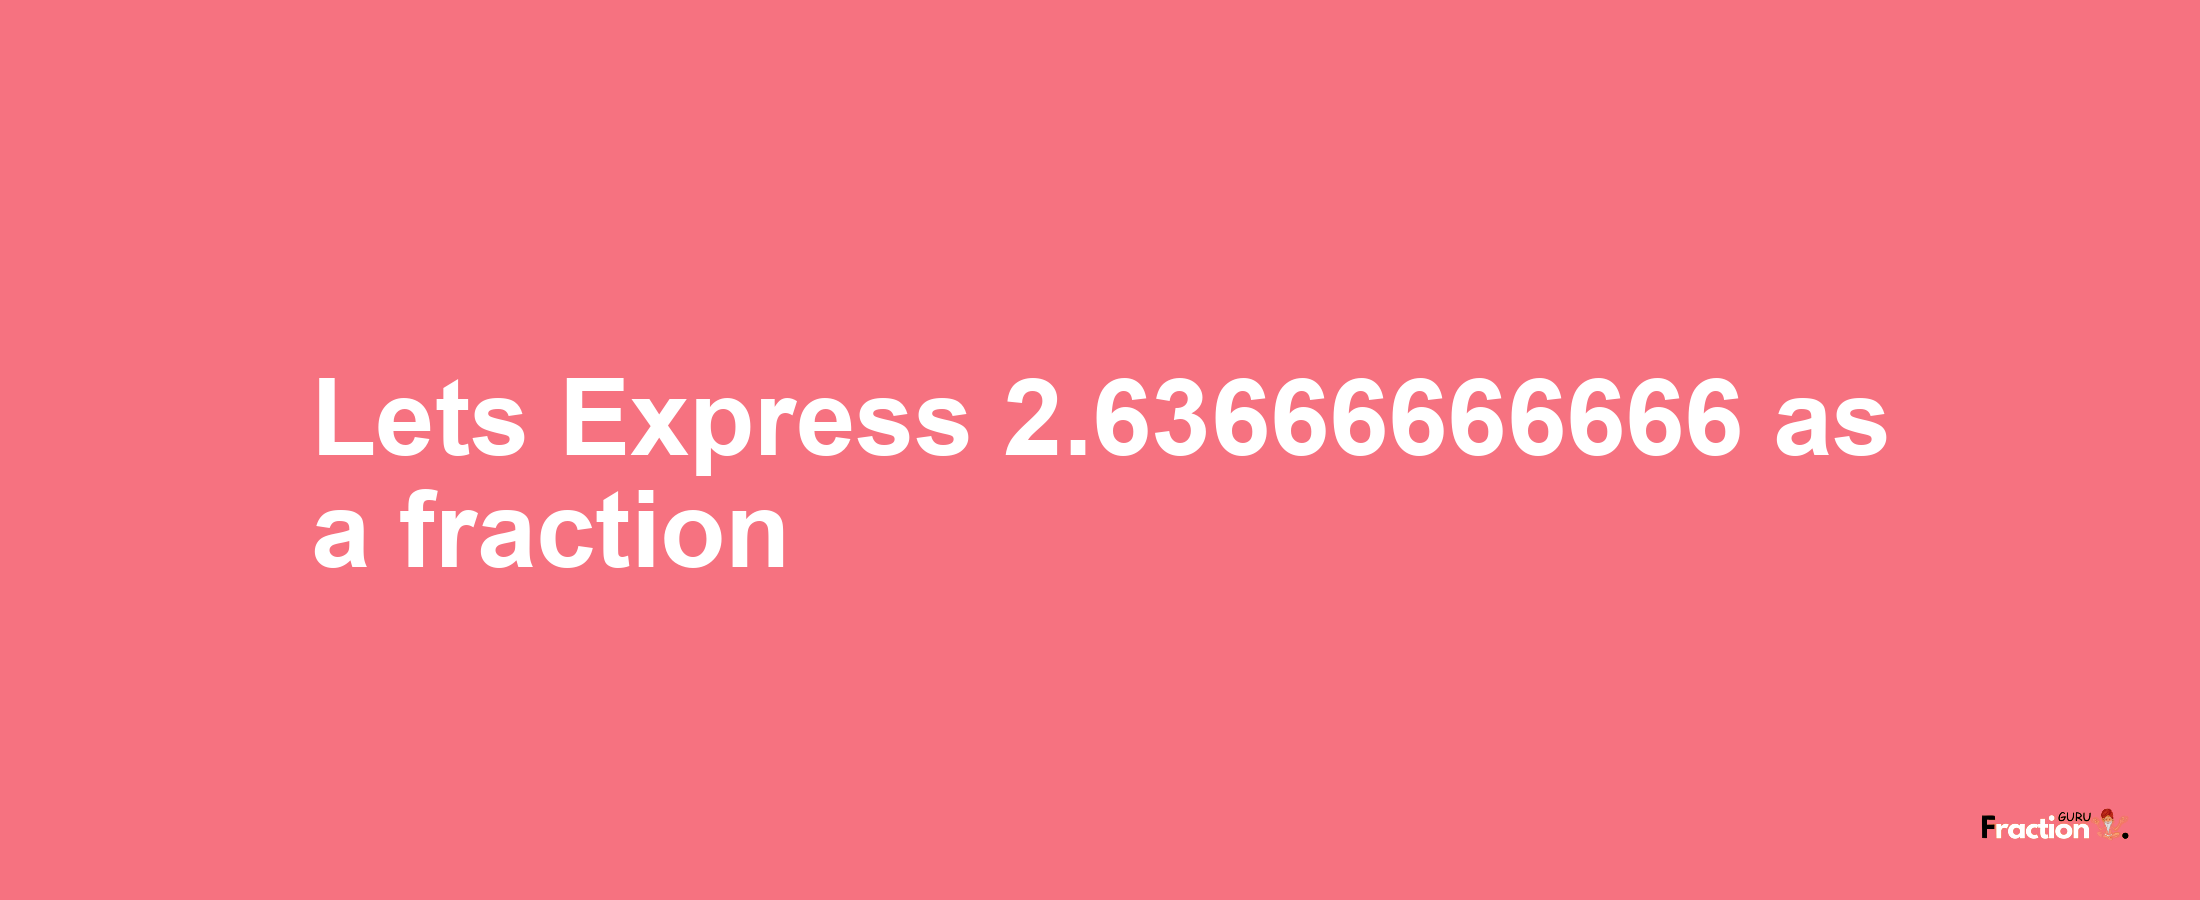 Lets Express 2.63666666666 as afraction